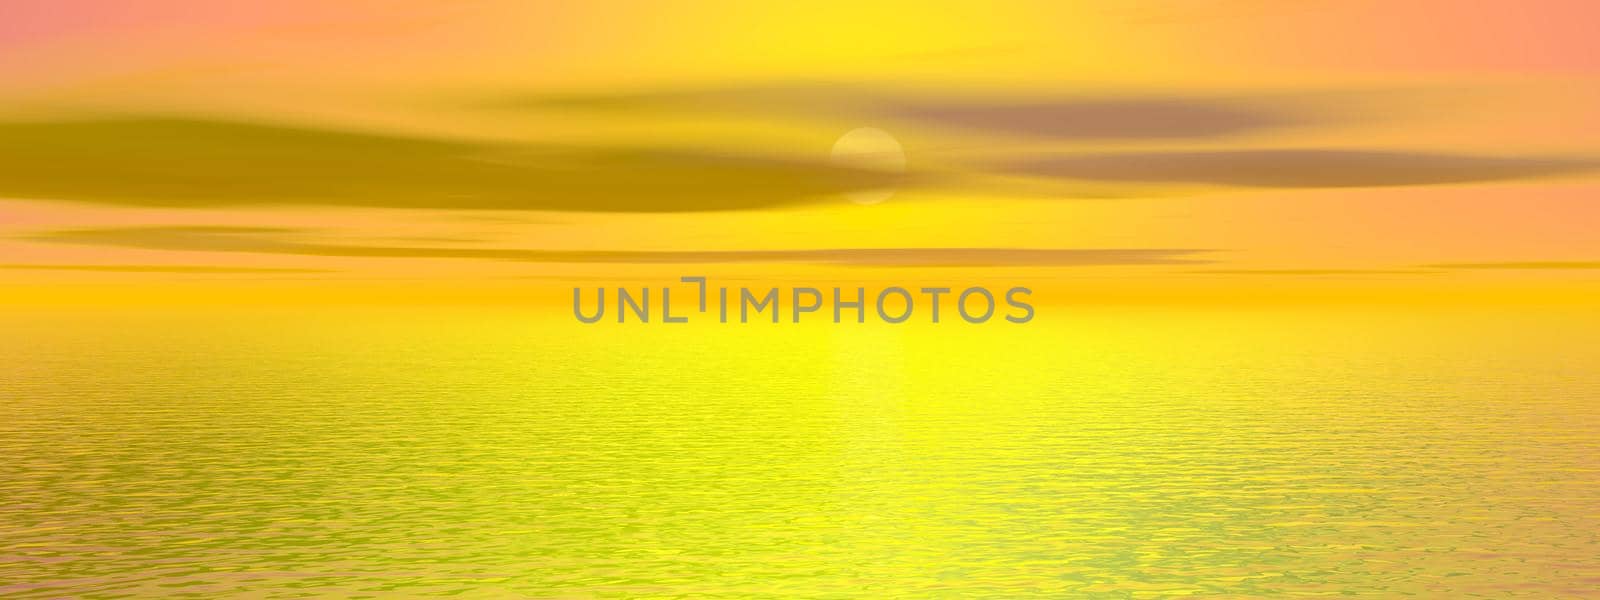 Beautiful sunset on the sea - 3d rendering by mariephotos